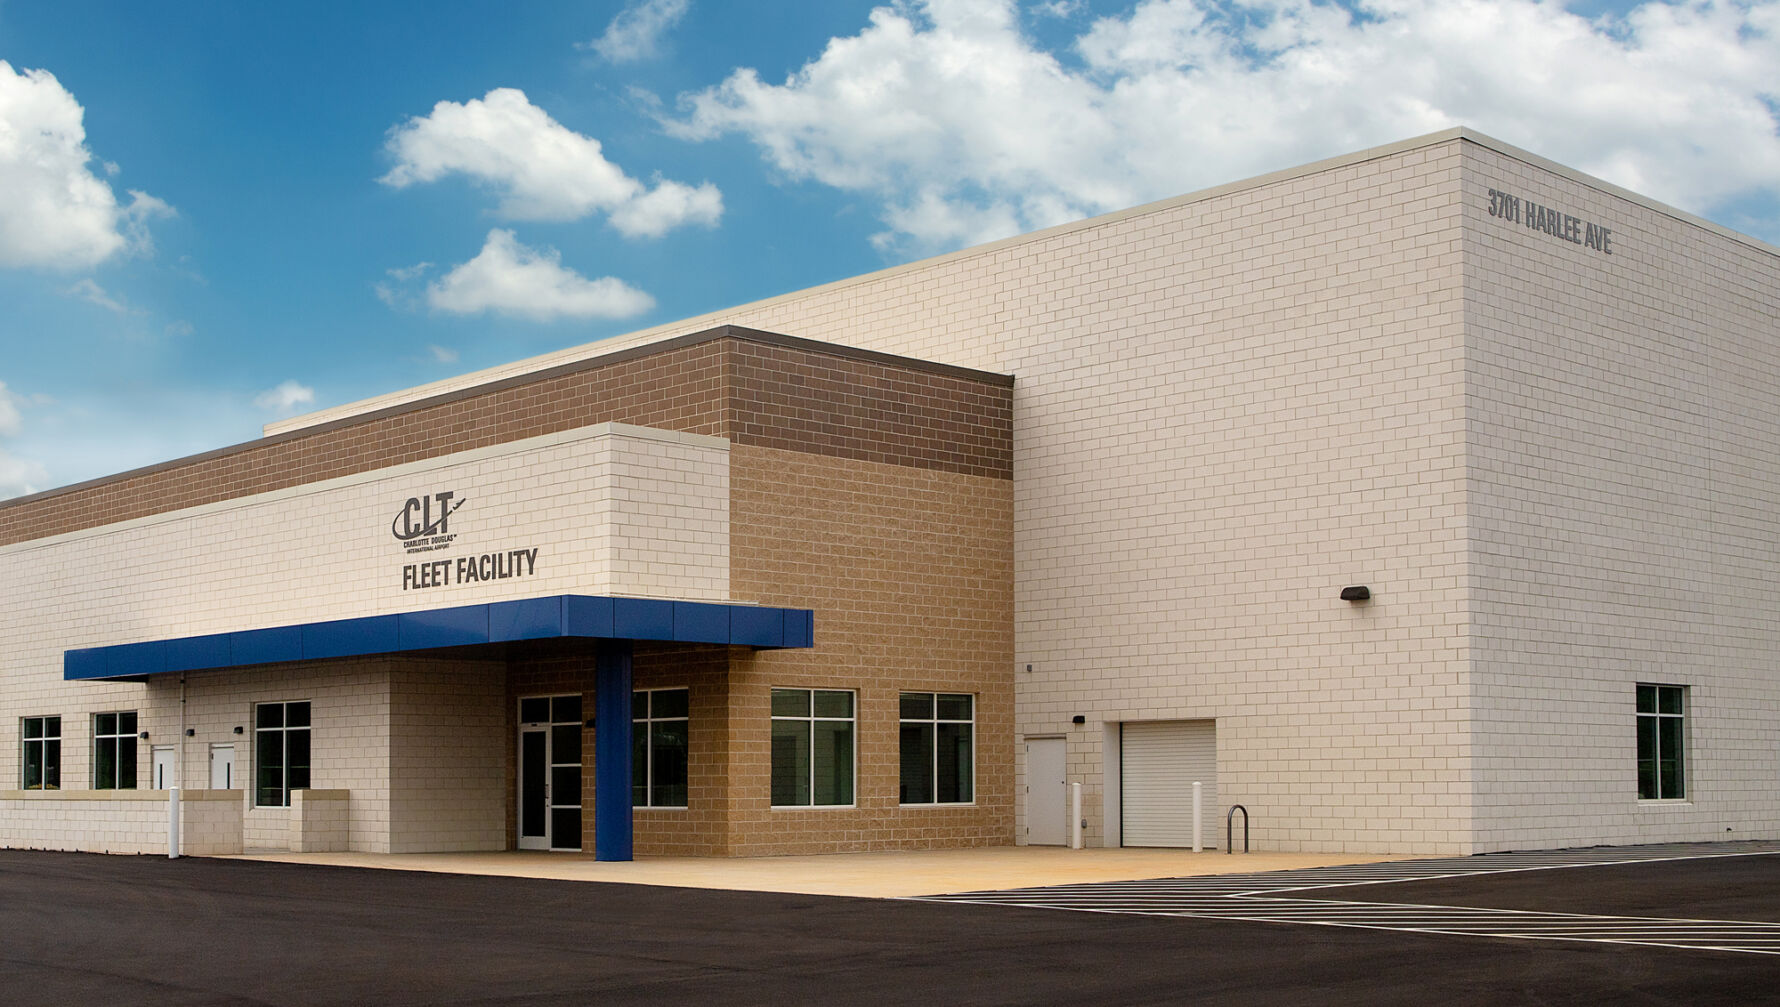 CLT Fleet Facility in Charlotte, NC featuring Prestige Masonry Architectural Block - Smooth Face in Ivory Coast and Braxton Beige